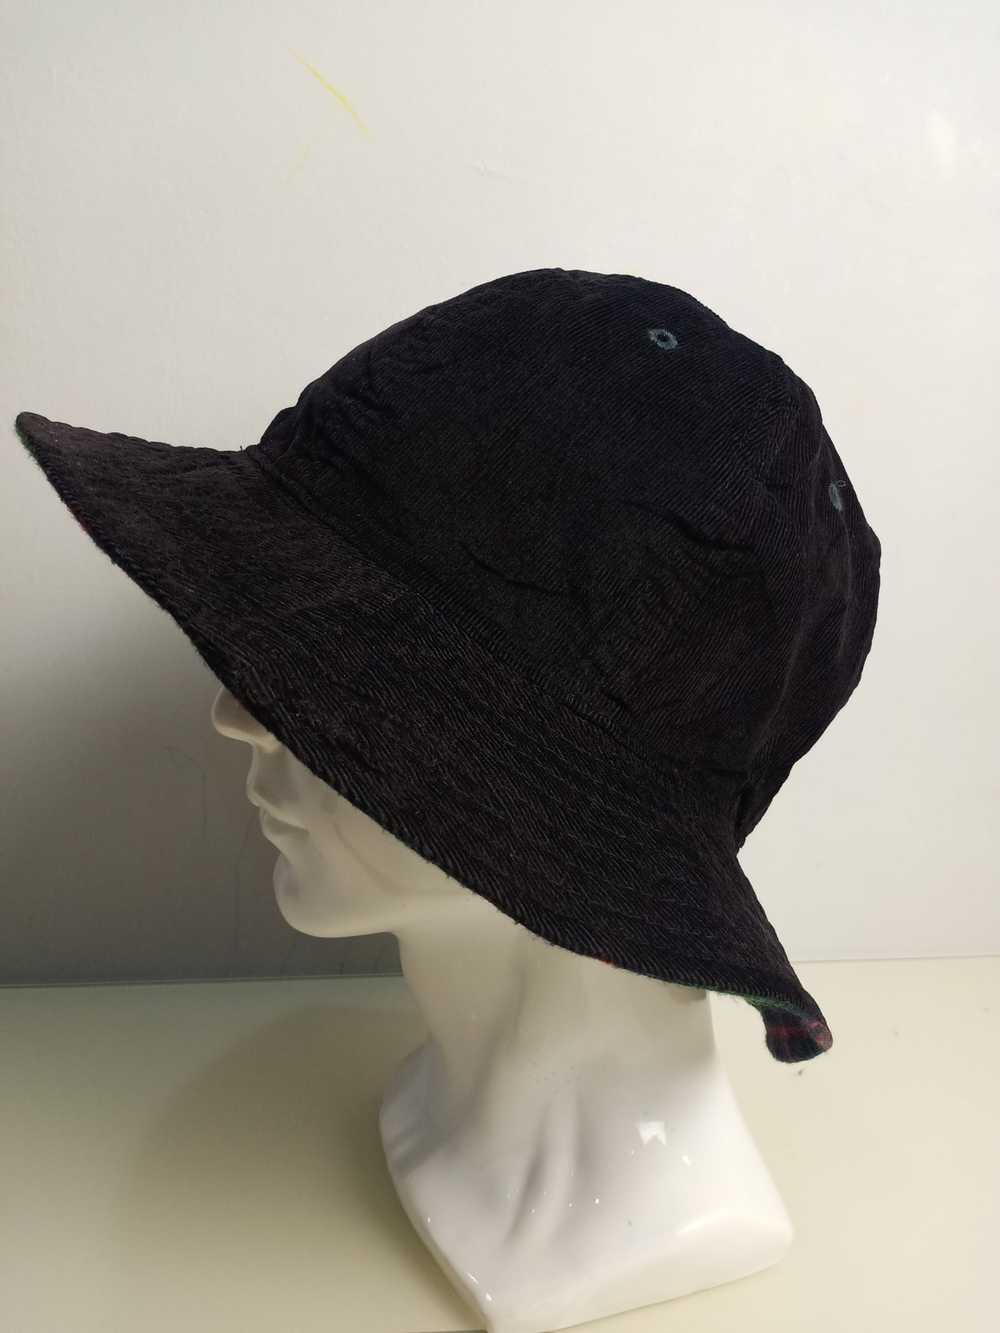 Other × Streetwear Unbranded Riversible Hat - image 6